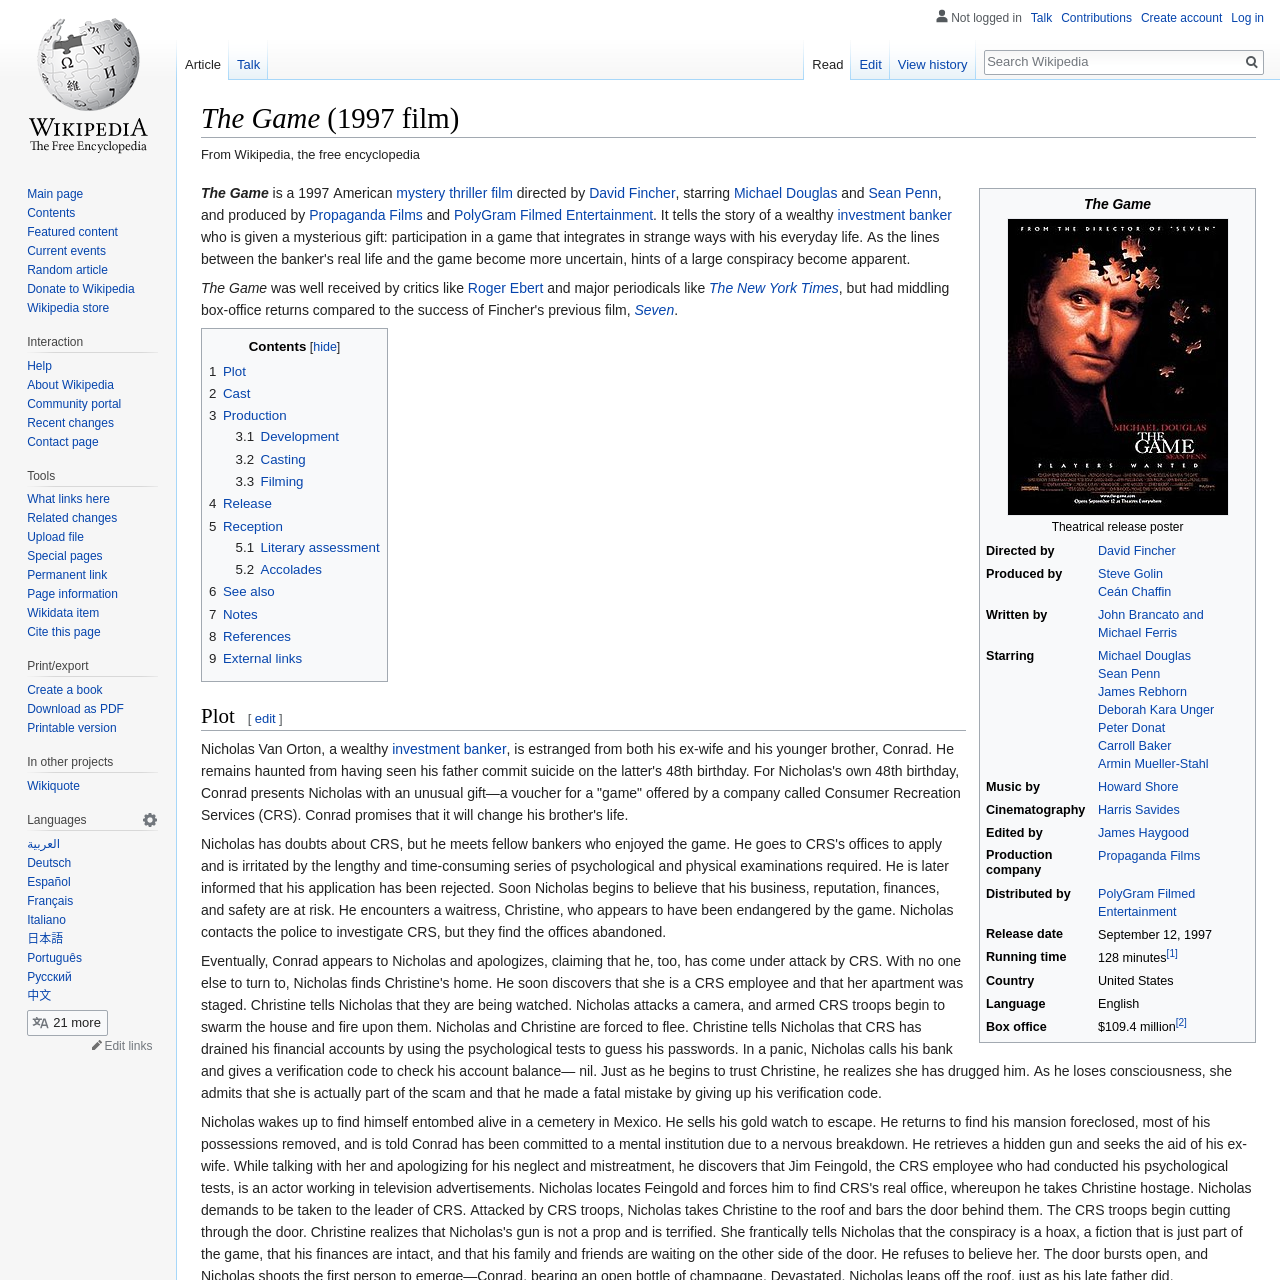 Play the Game (film) - Wikipedia